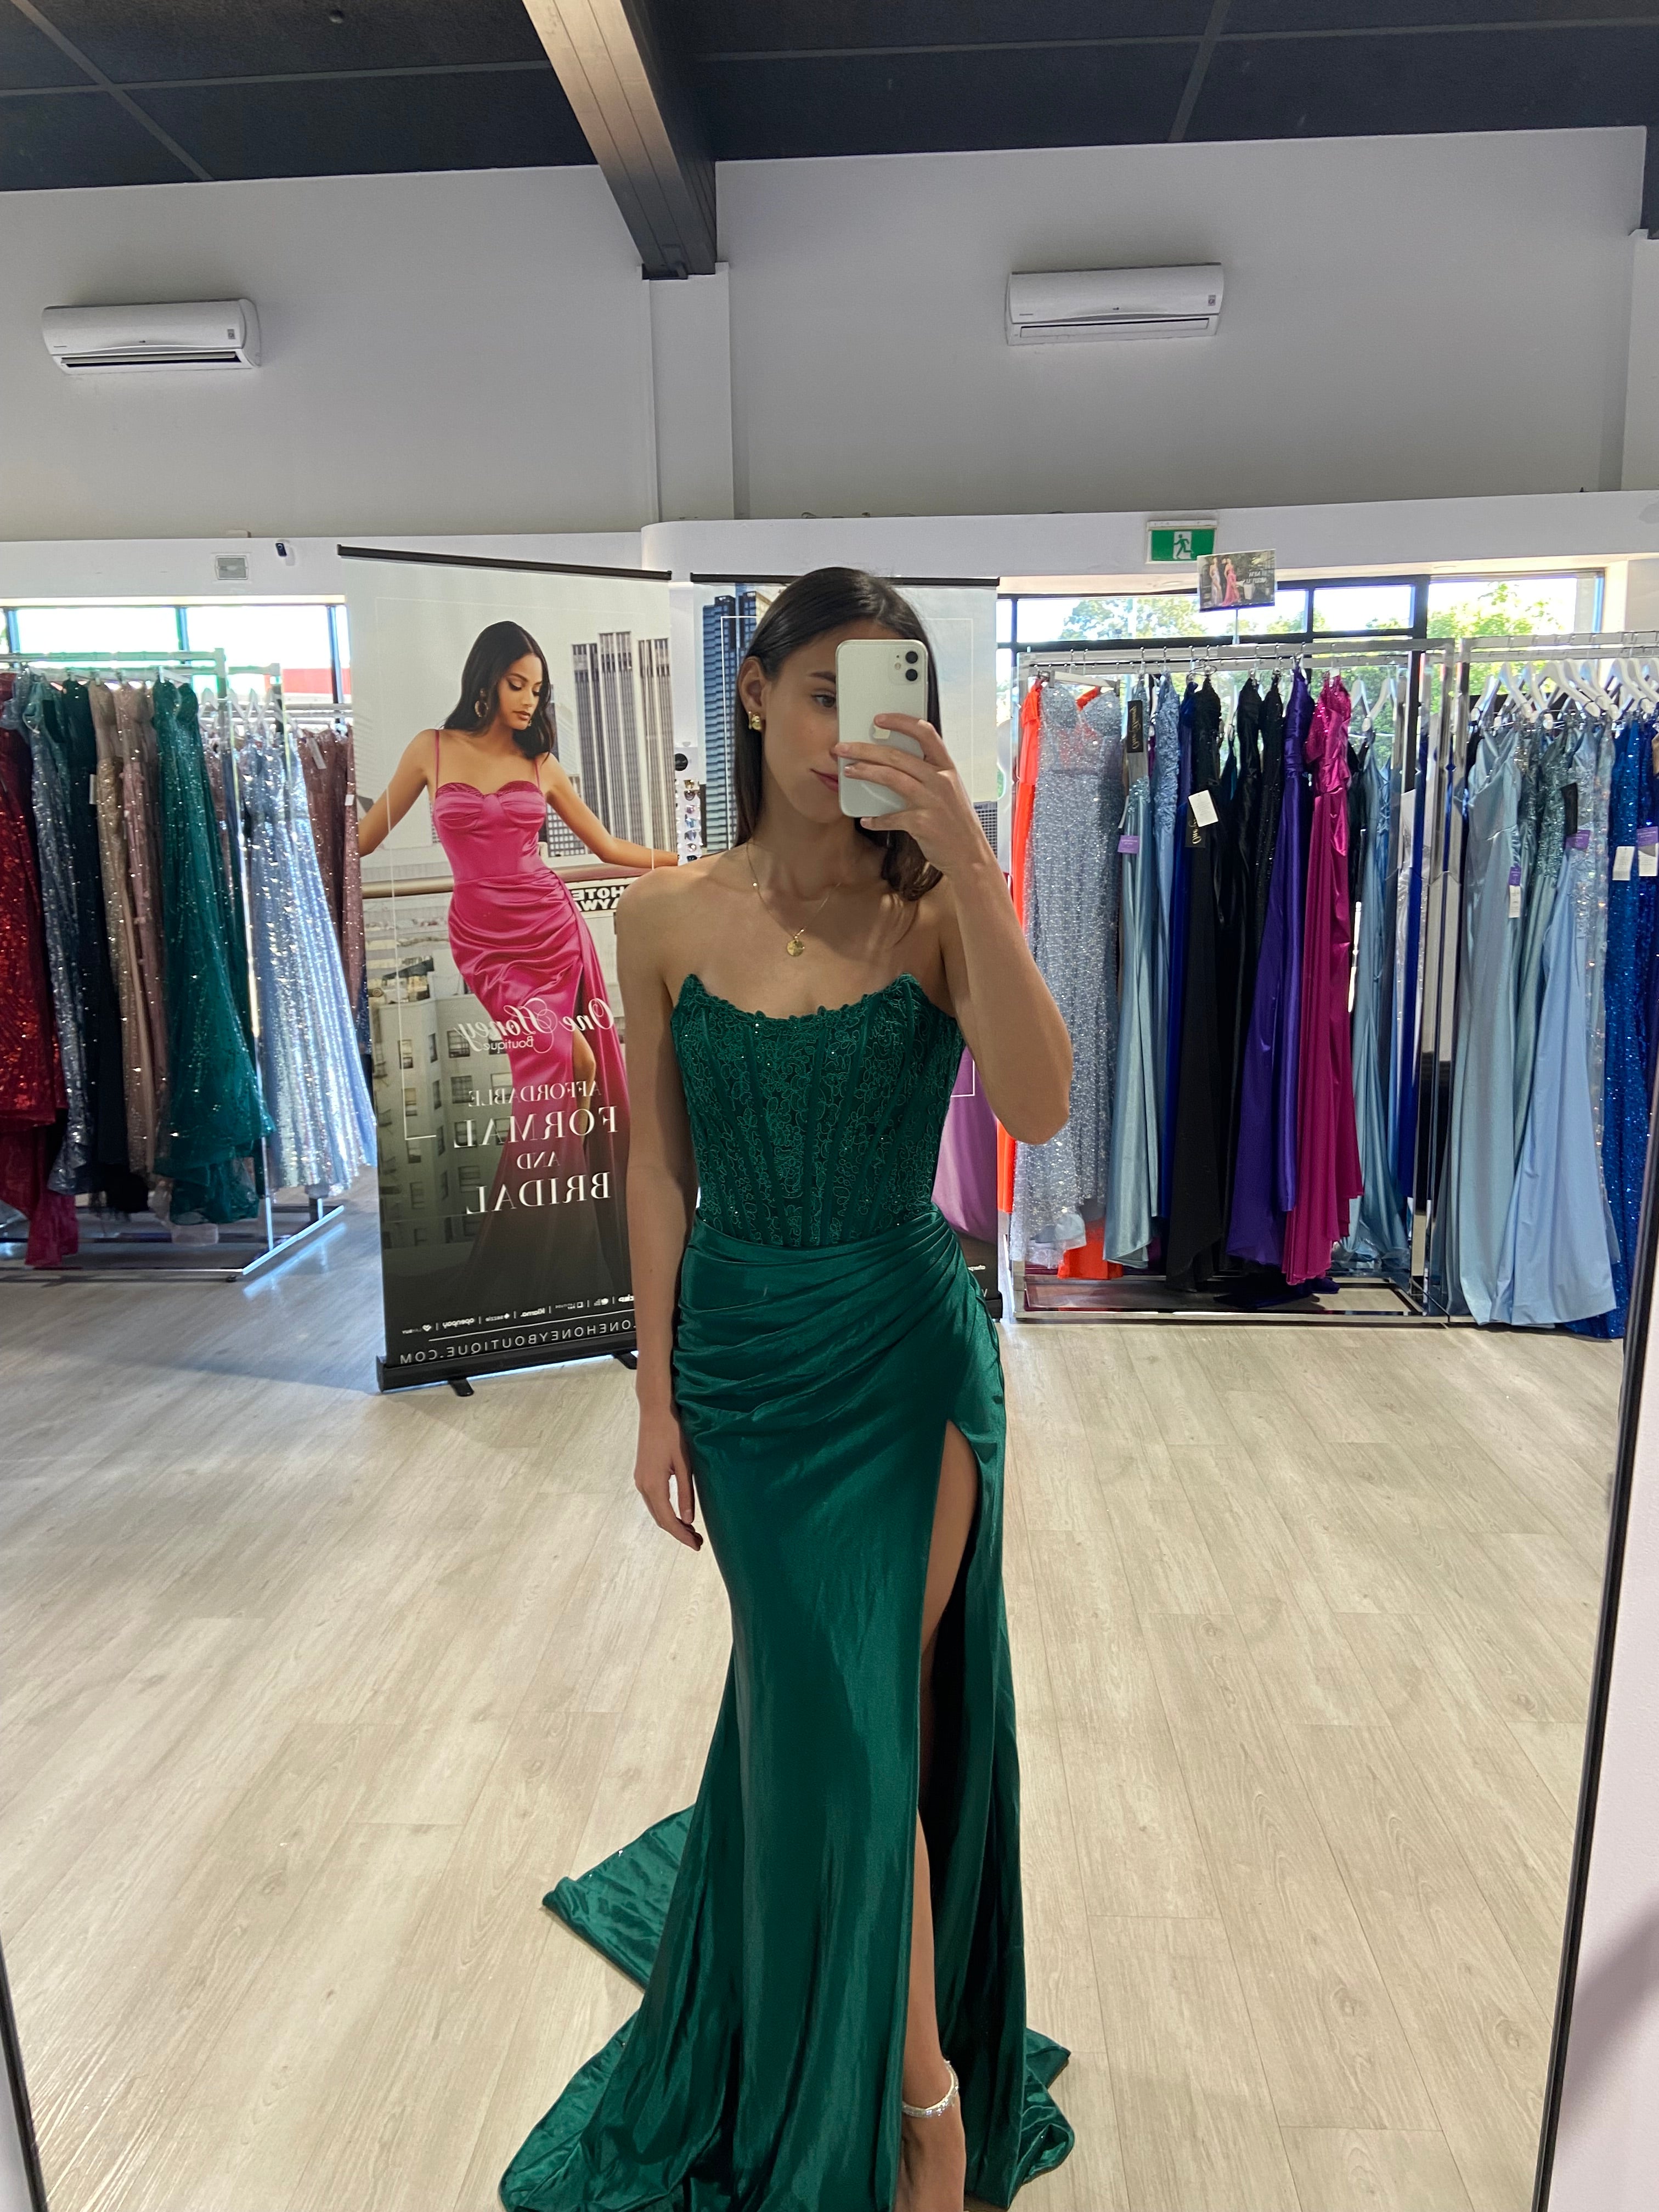 Honey Couture AUGUST Emerald Green Strapless Embellished Bustier Satin Mermaid Formal Dress